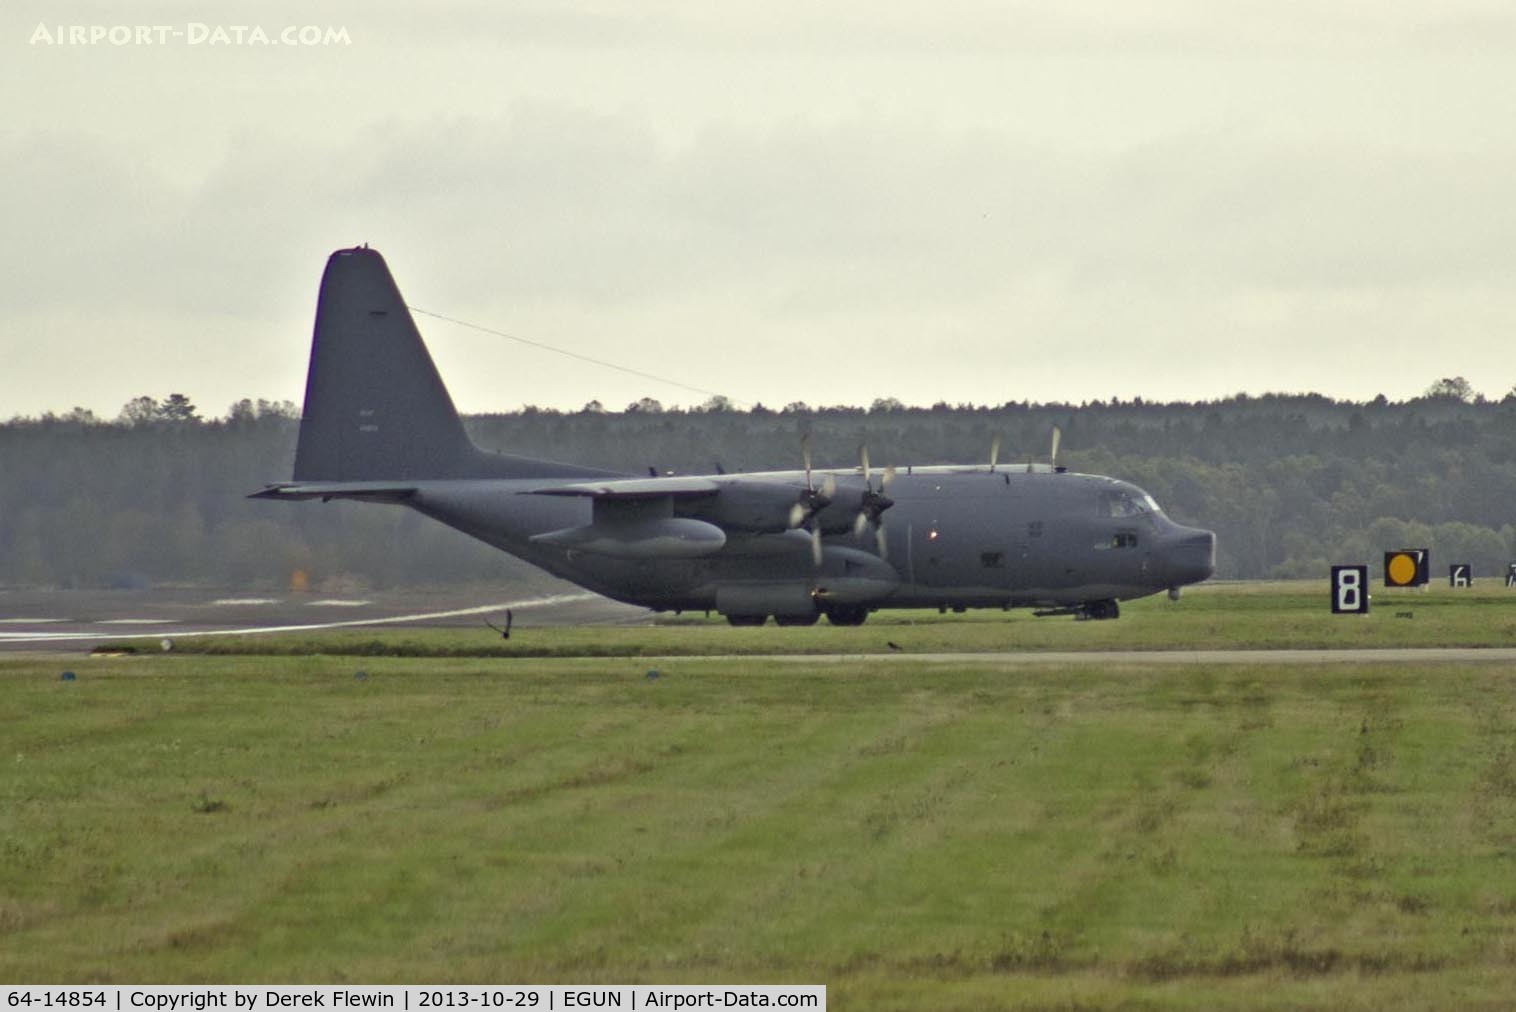 64-14854, 1964 Lockheed MC-130P Combat Shadow C/N 382-4038, Resident MC-130P Combat Shadow, Josh35, 67th SOS,  returning to EGUN from USAFE Spagdahlem ((ETAD) Germany due to adverse weather in the UK.